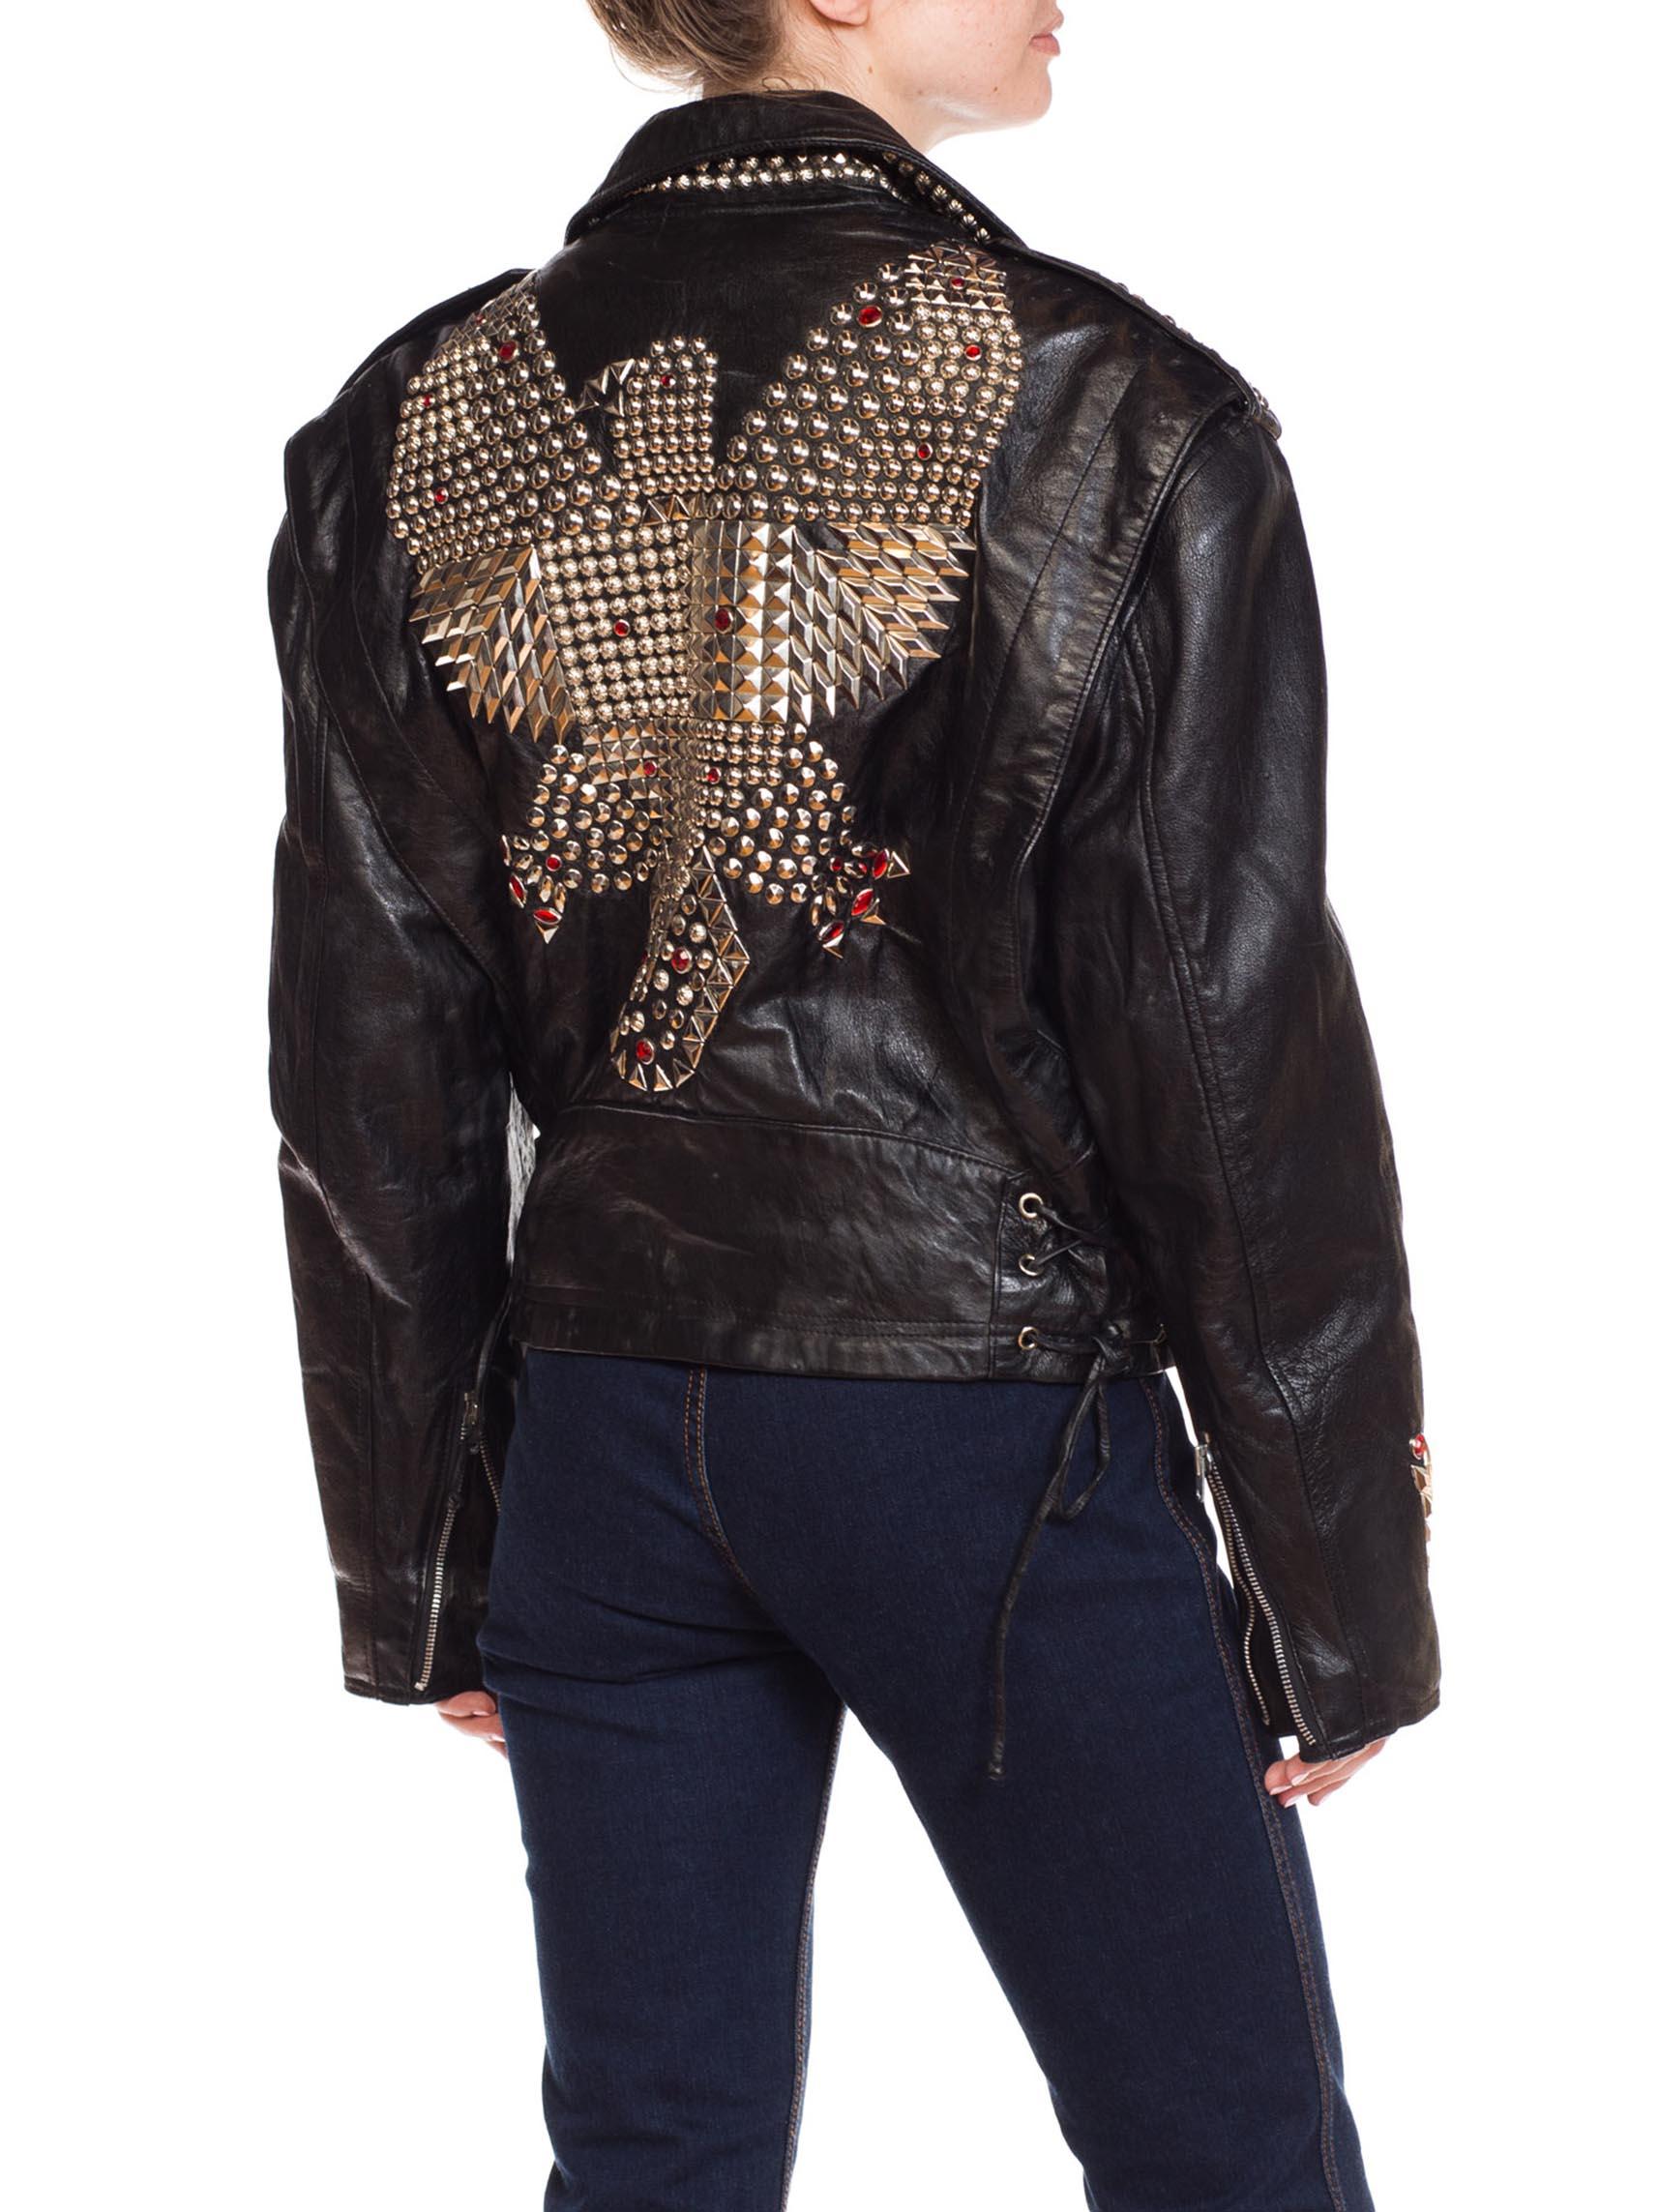 Women's or Men's 1990S JEFF HAMILTON Men's Studded Leather Biker Jacket With Crystals And Eagle For Sale